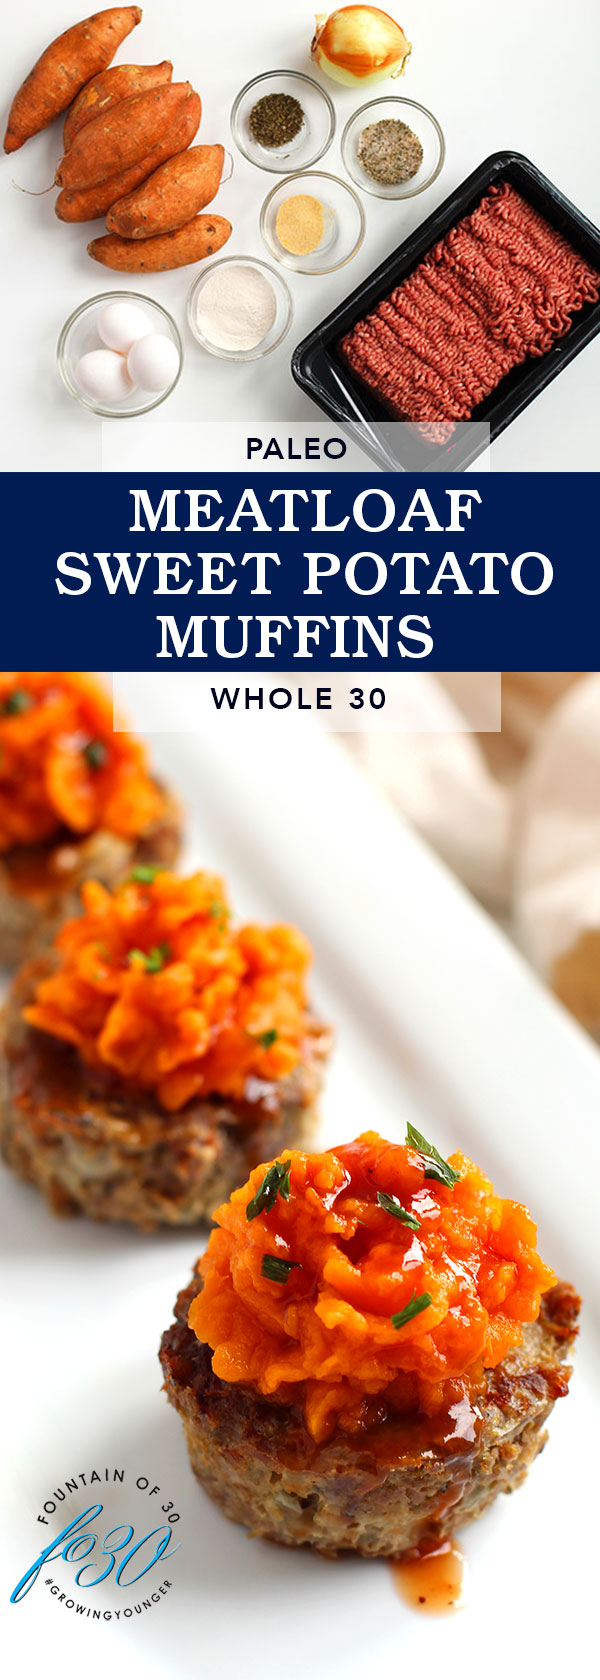 meatloaf sweet potato muffins fountainof30